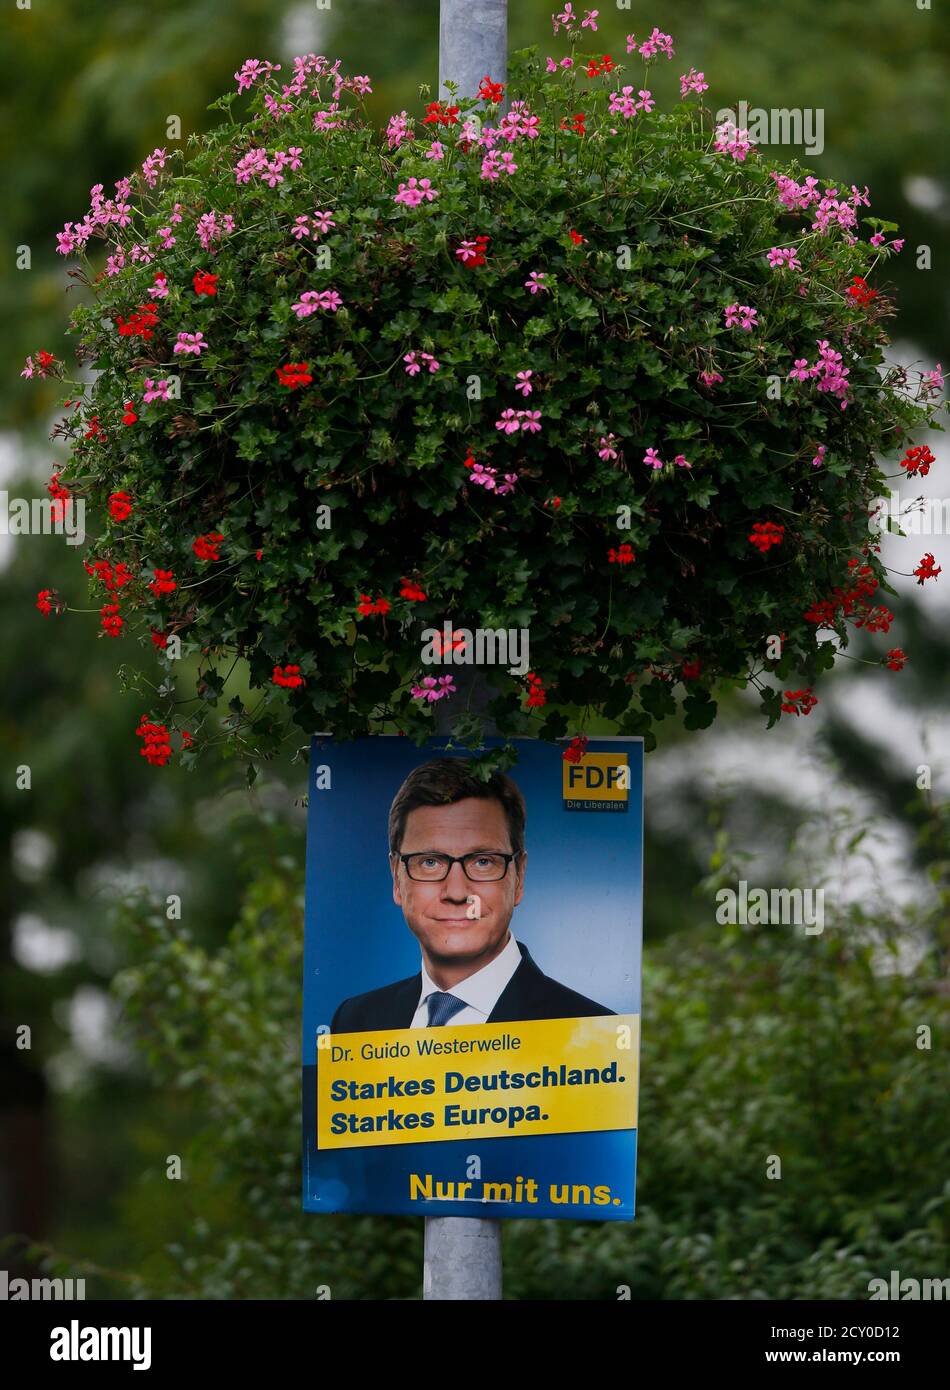 The election campaign poster of German Foreign minister Guido Westerwelle from the liberal Free Democratic party FDP is placed under a huge flower pot in the western German town of Bad Honnef near Bonn September 19, 2013. Germany will hold general elections on September 22 in which German Chancellor Angela Merkel is running for a third term with her preferred coalition partner FDP.               REUTERS/Wolfgang Rattay   (GERMANY - Tags: POLITICS ELECTIONS) Stock Photo